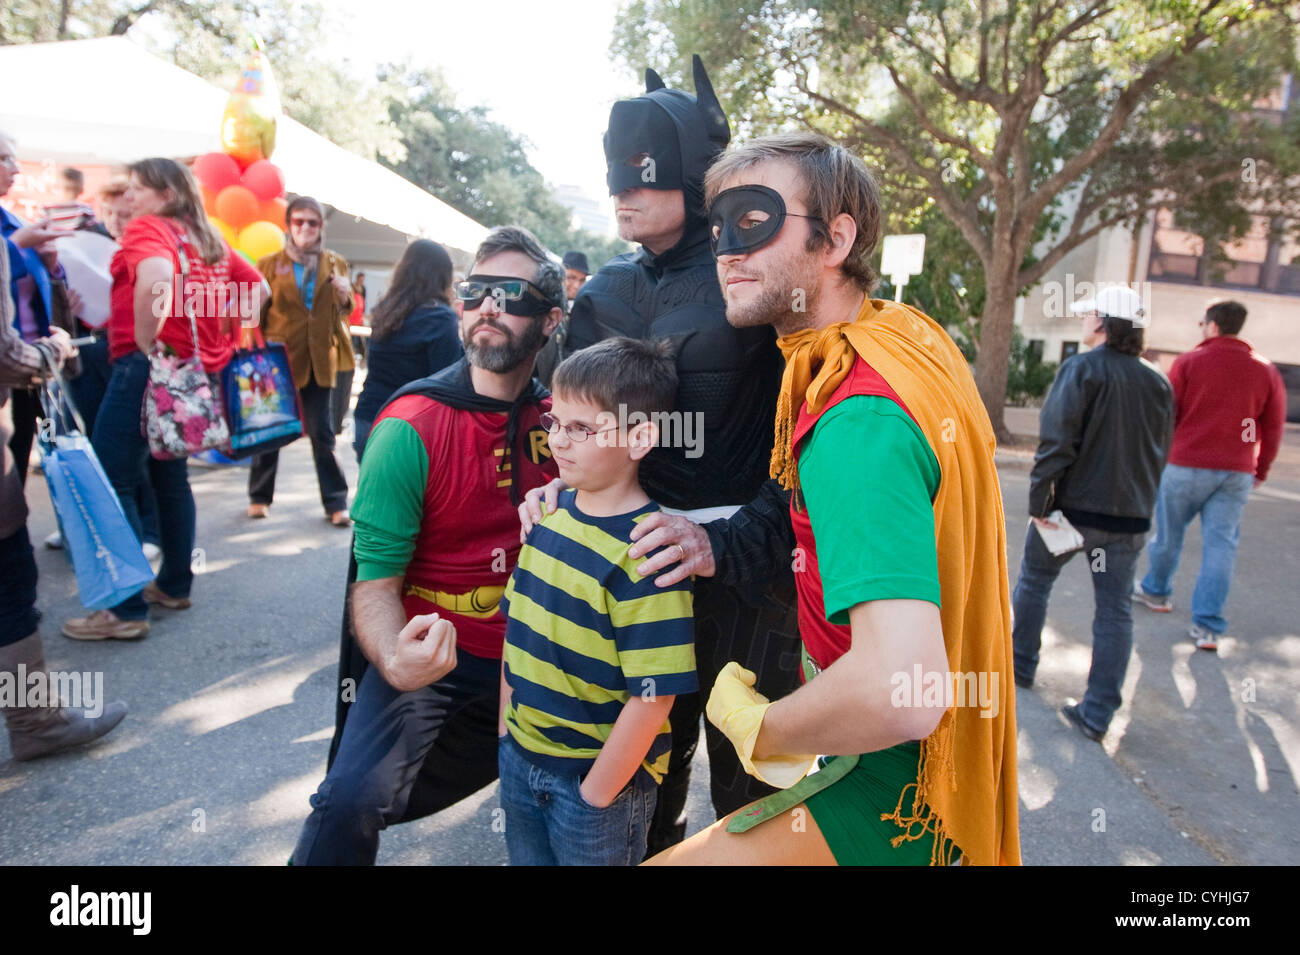 Children's authors dressed as Batman and Robins pose with fan outside children's activity tent at Texas Book Festival in Austin. Stock Photo